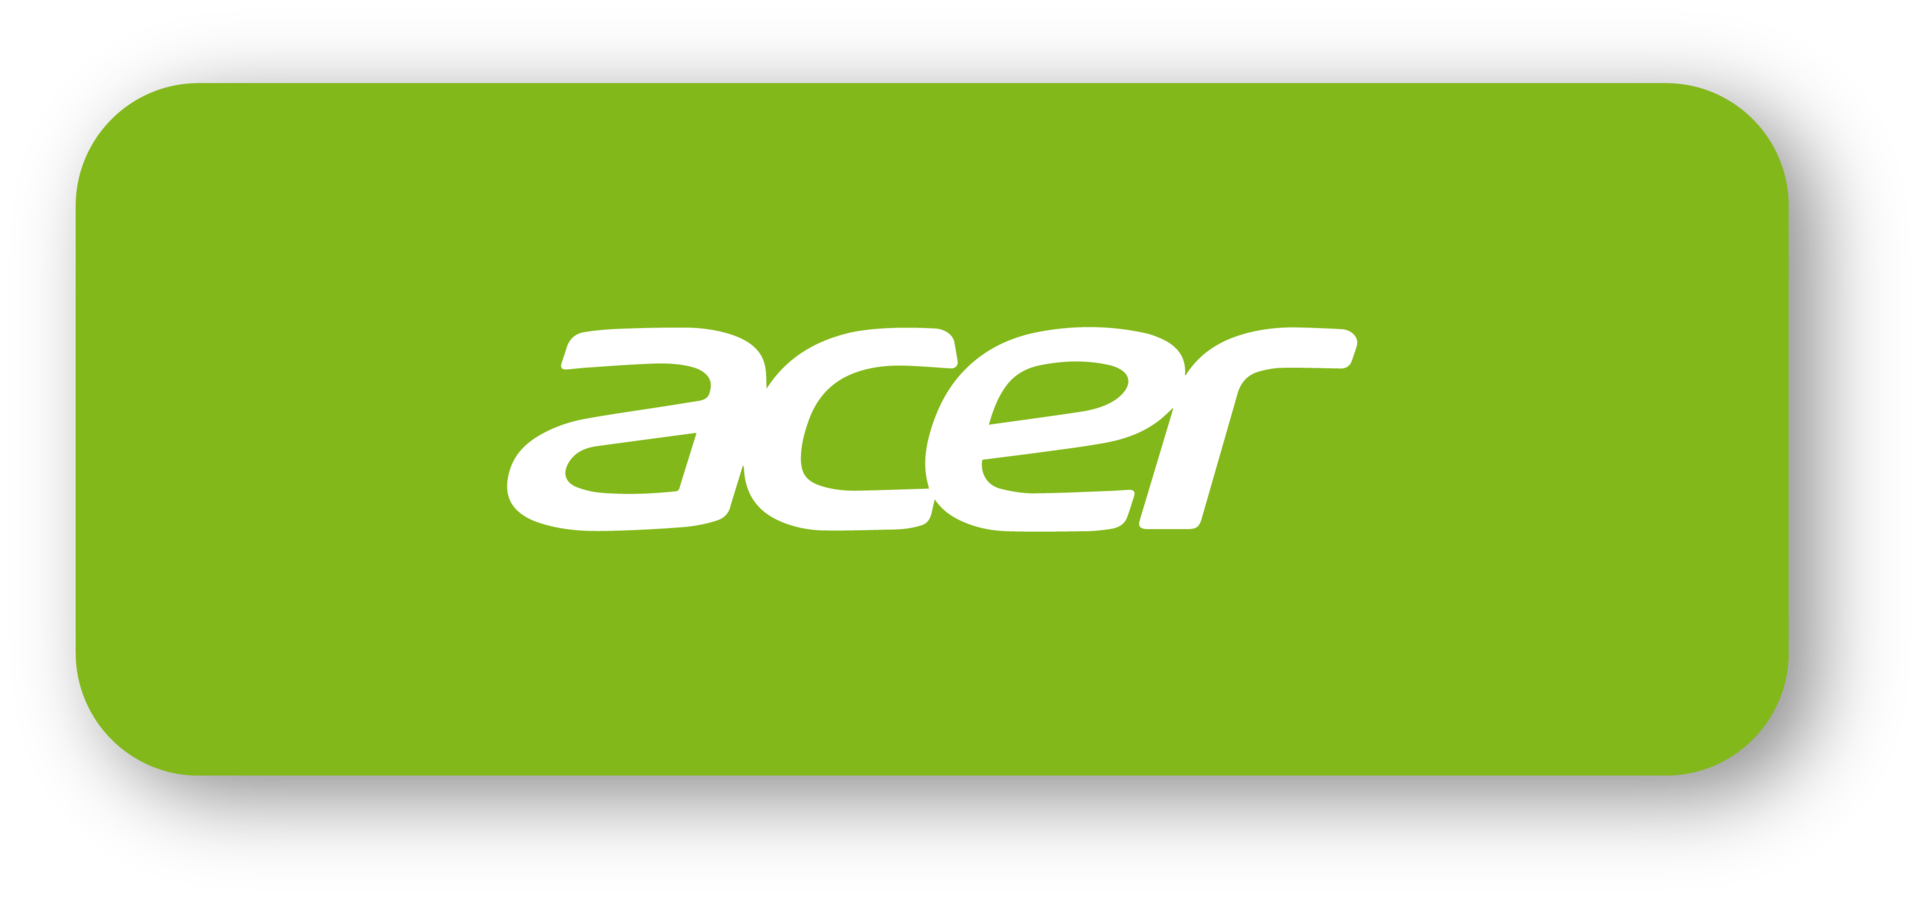 Acer company logo with realistic shadow. Popular computer and laptop manufacturing companies logotype. png